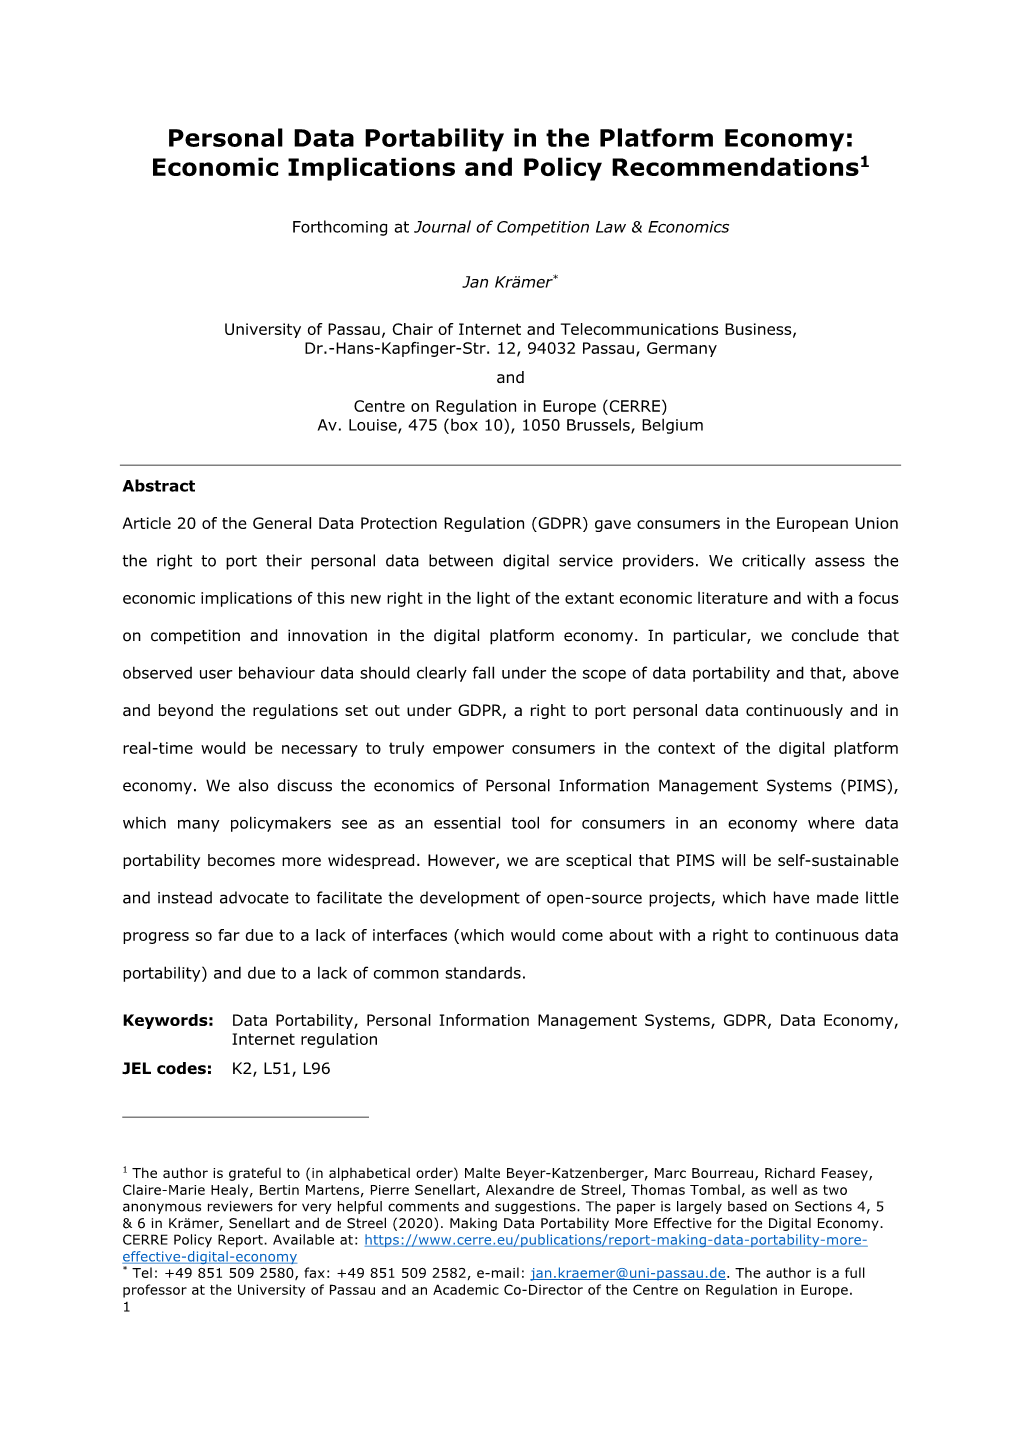 Personal Data Portability in the Platform Economy: Economic Implications and Policy Recommendations1